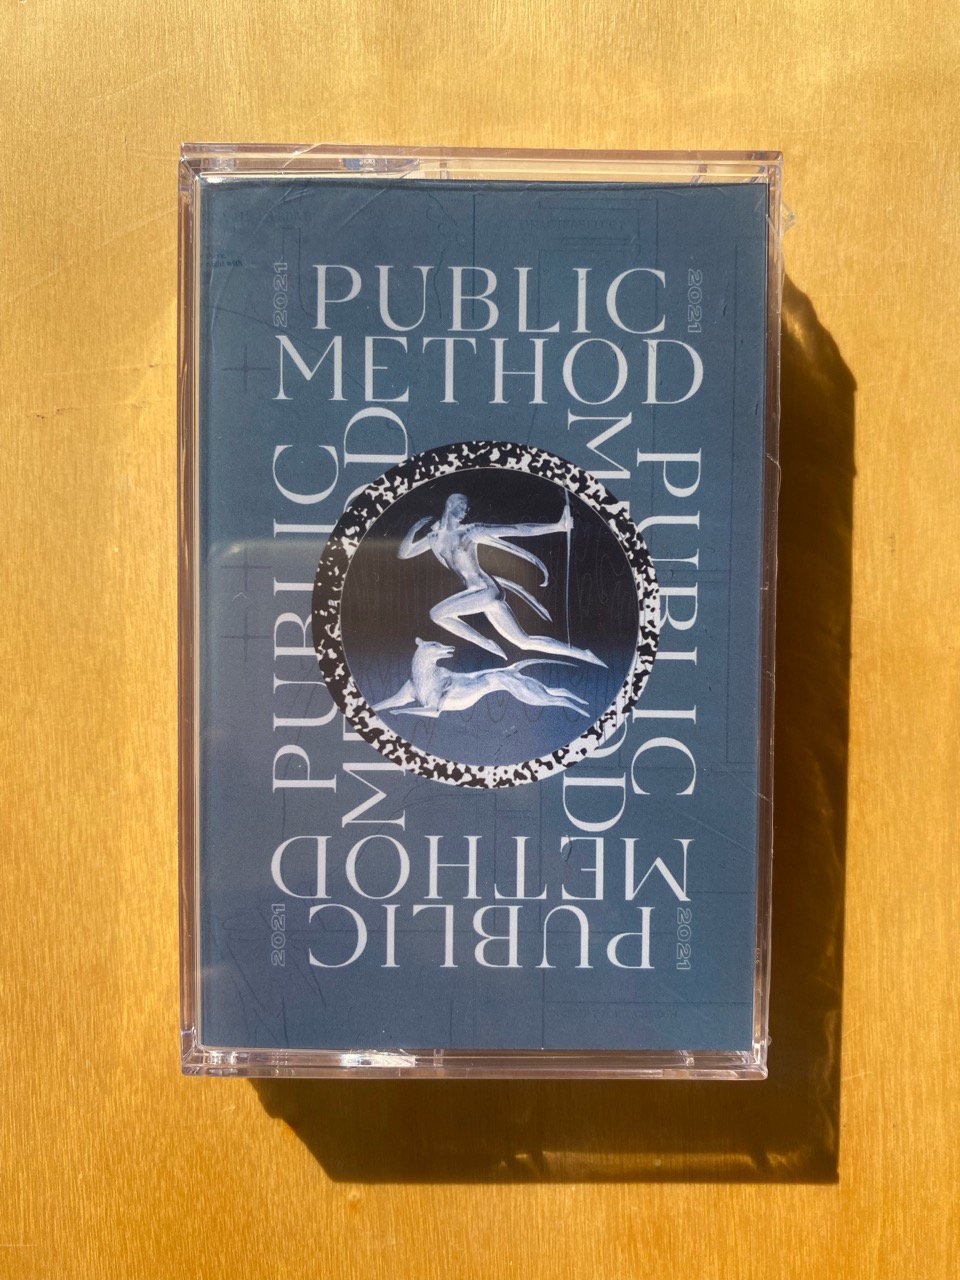 Public Method by Dyelo think & Lidly 